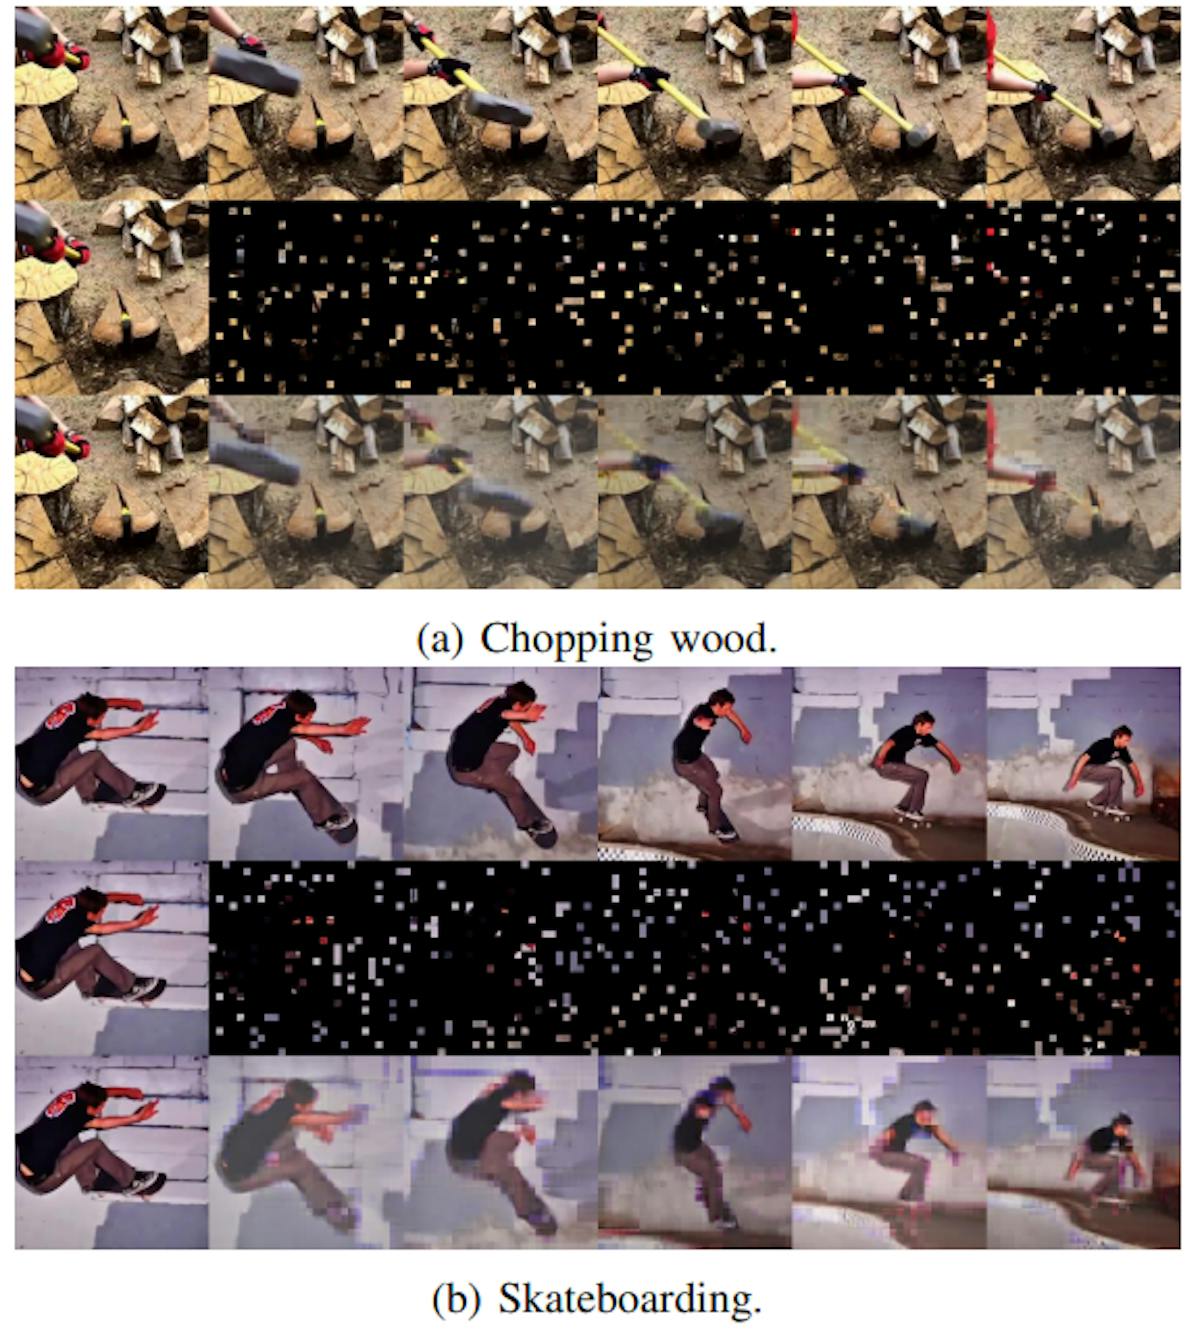 Fig. 1: Visualizations on the Kinetics-400 [7] validation set (masking rate 90%). For each video sequence, we sample 6 frames with a frame gap of 4. Each subfigure displays the original frames (top), masked future frames (middle), and CatMAE reconstruction results (bottom).